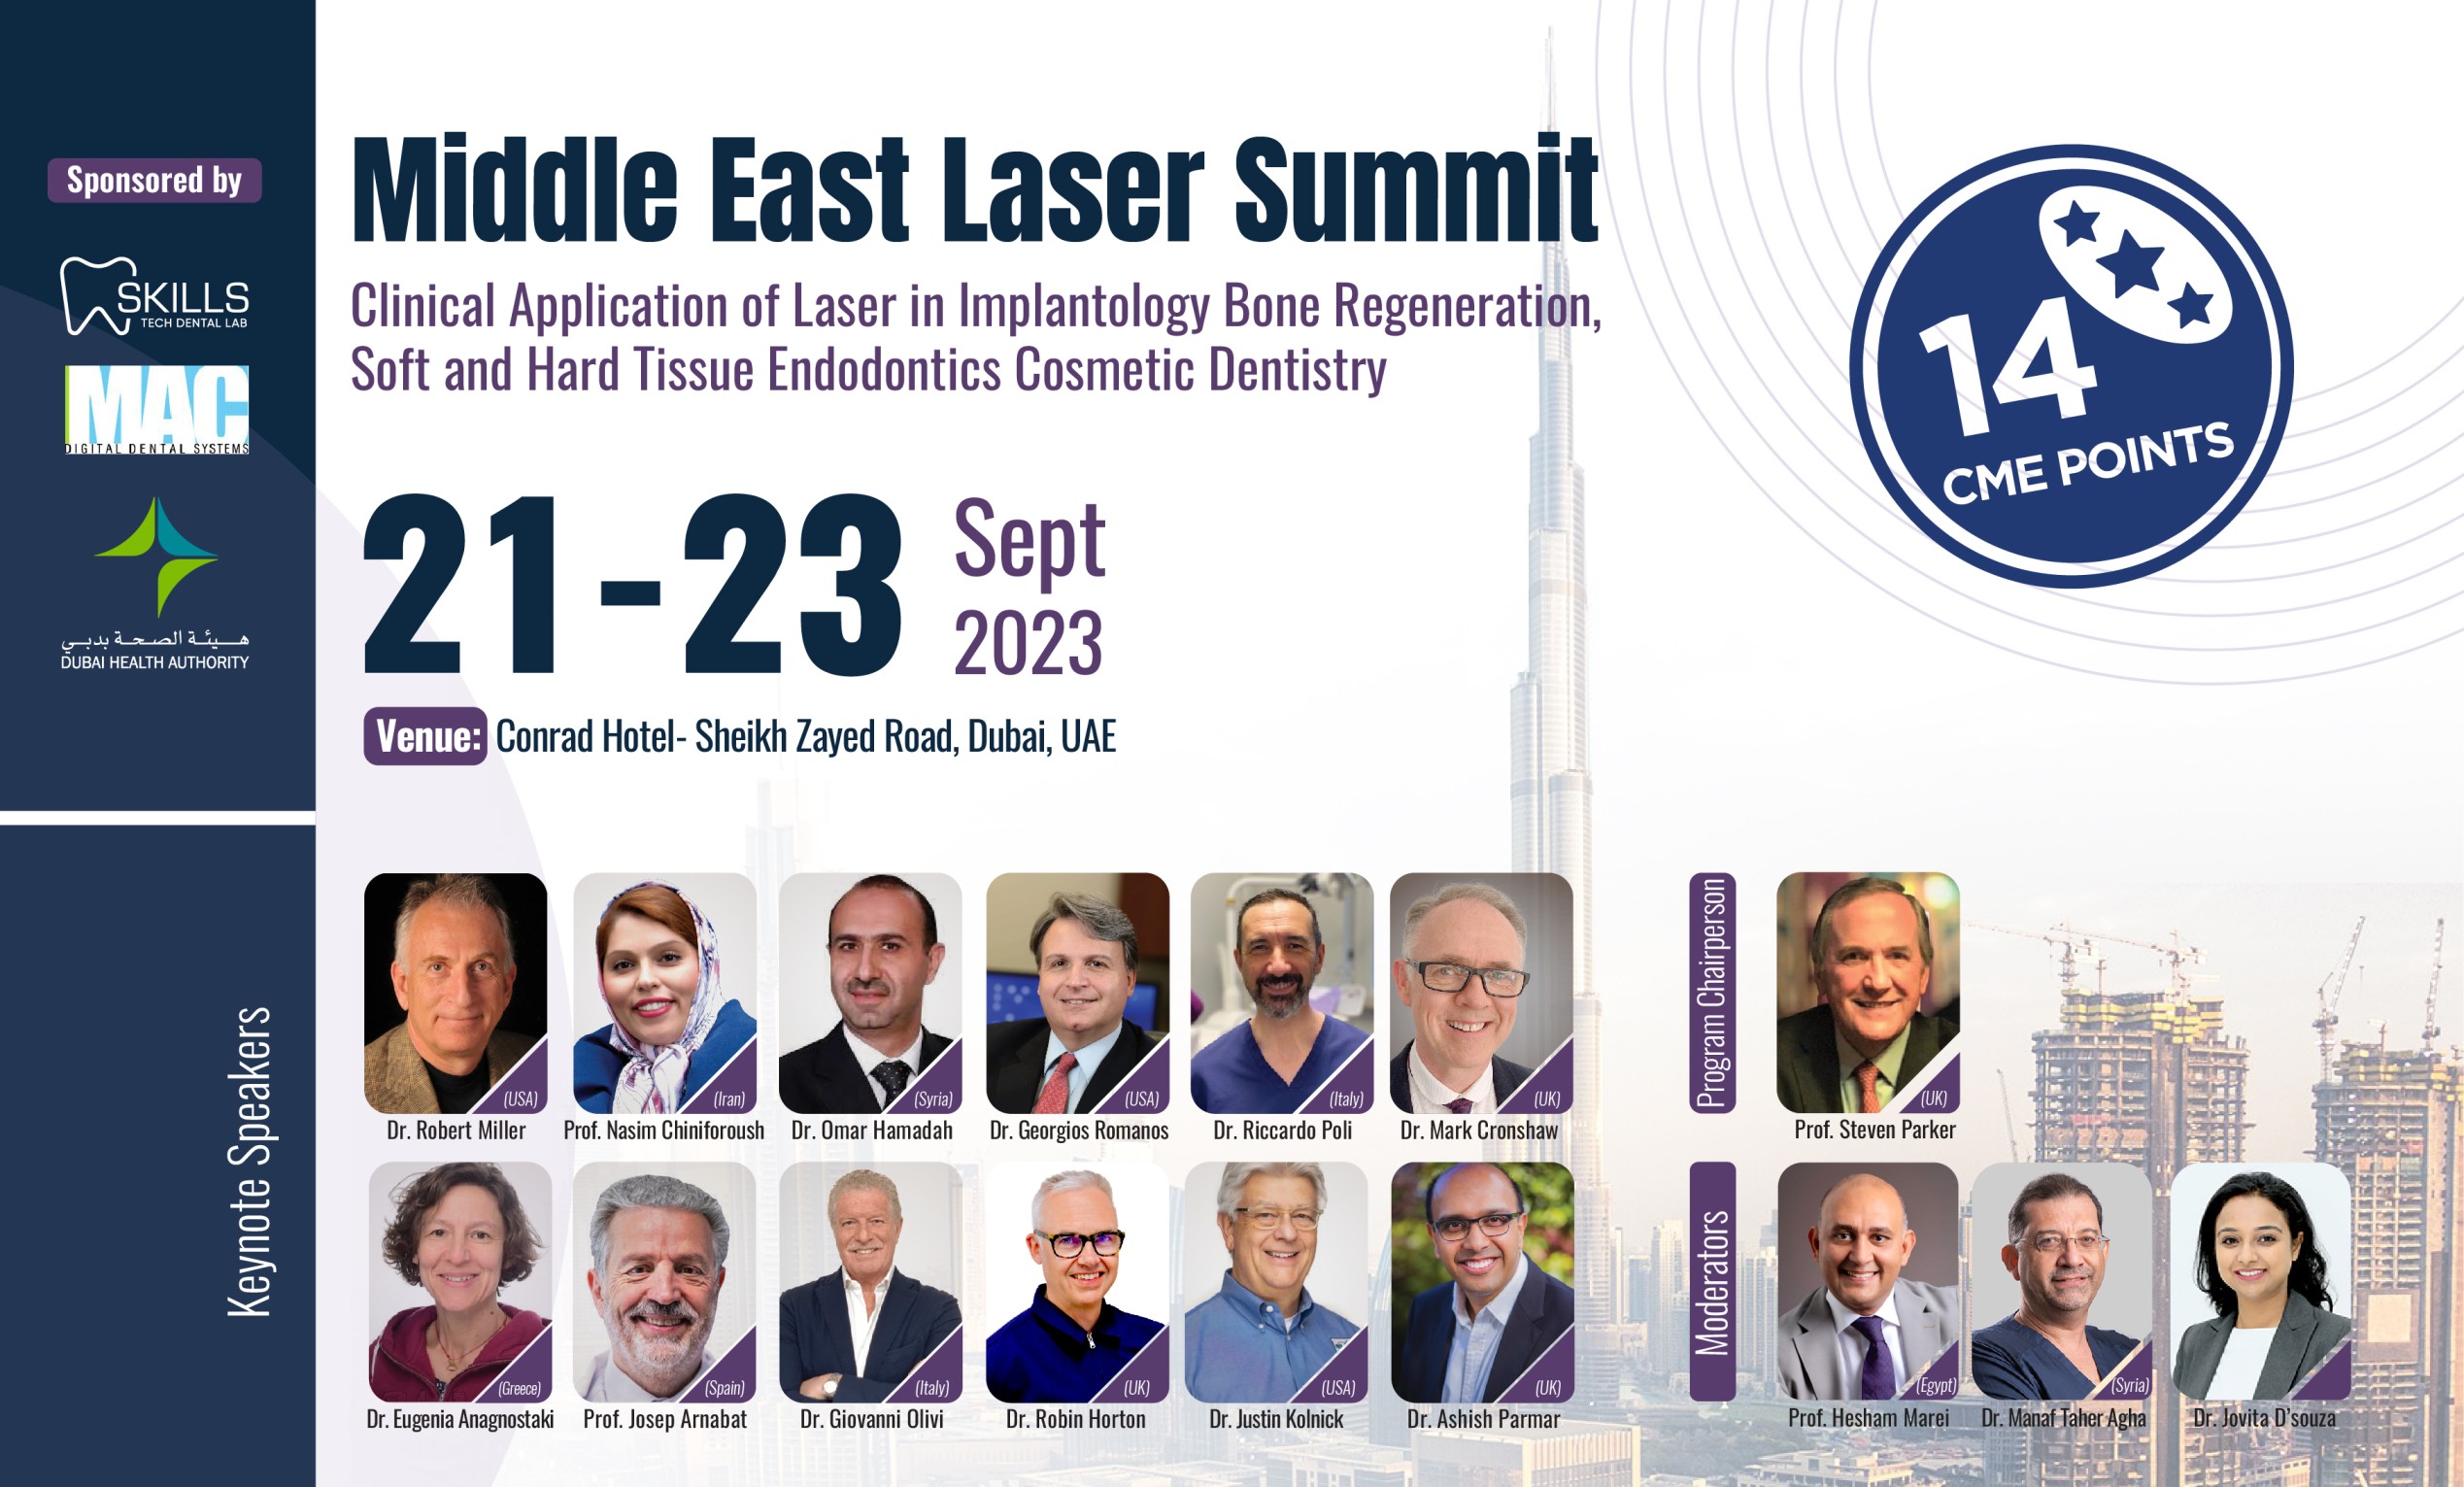 >Middle East Laser Summit